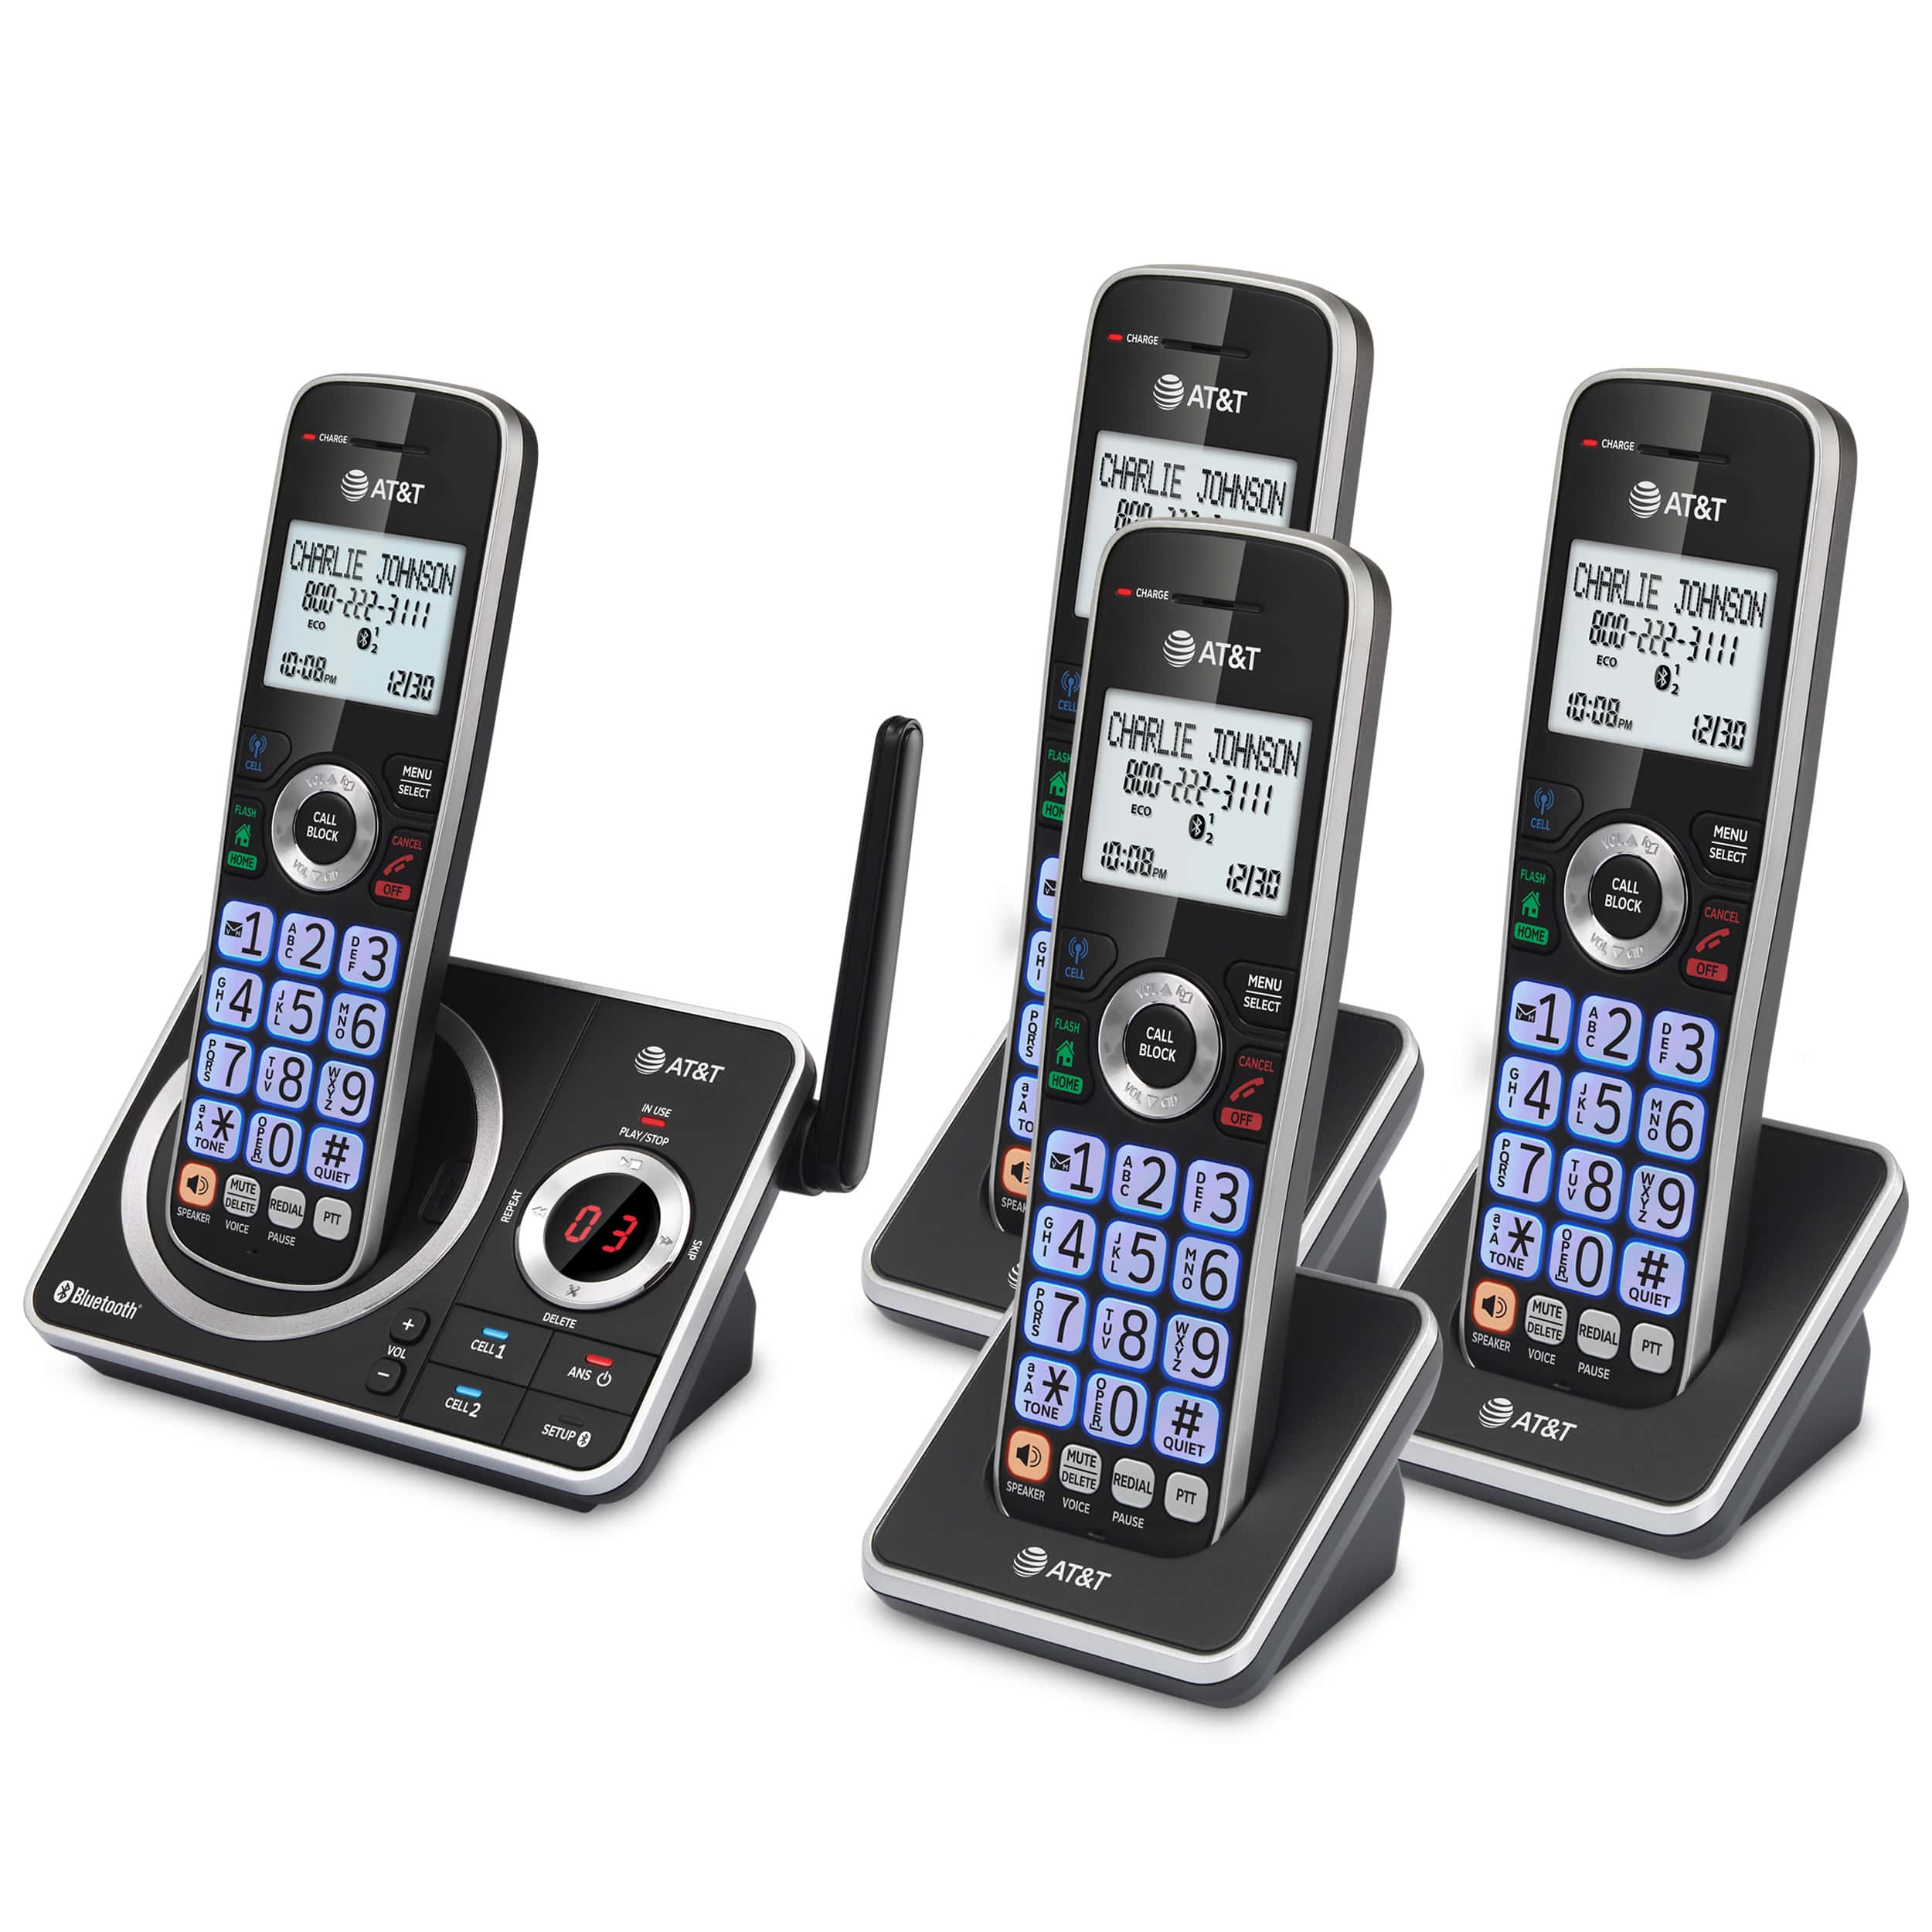 4 Handset Answering System with Connect to Cell™ - view 2